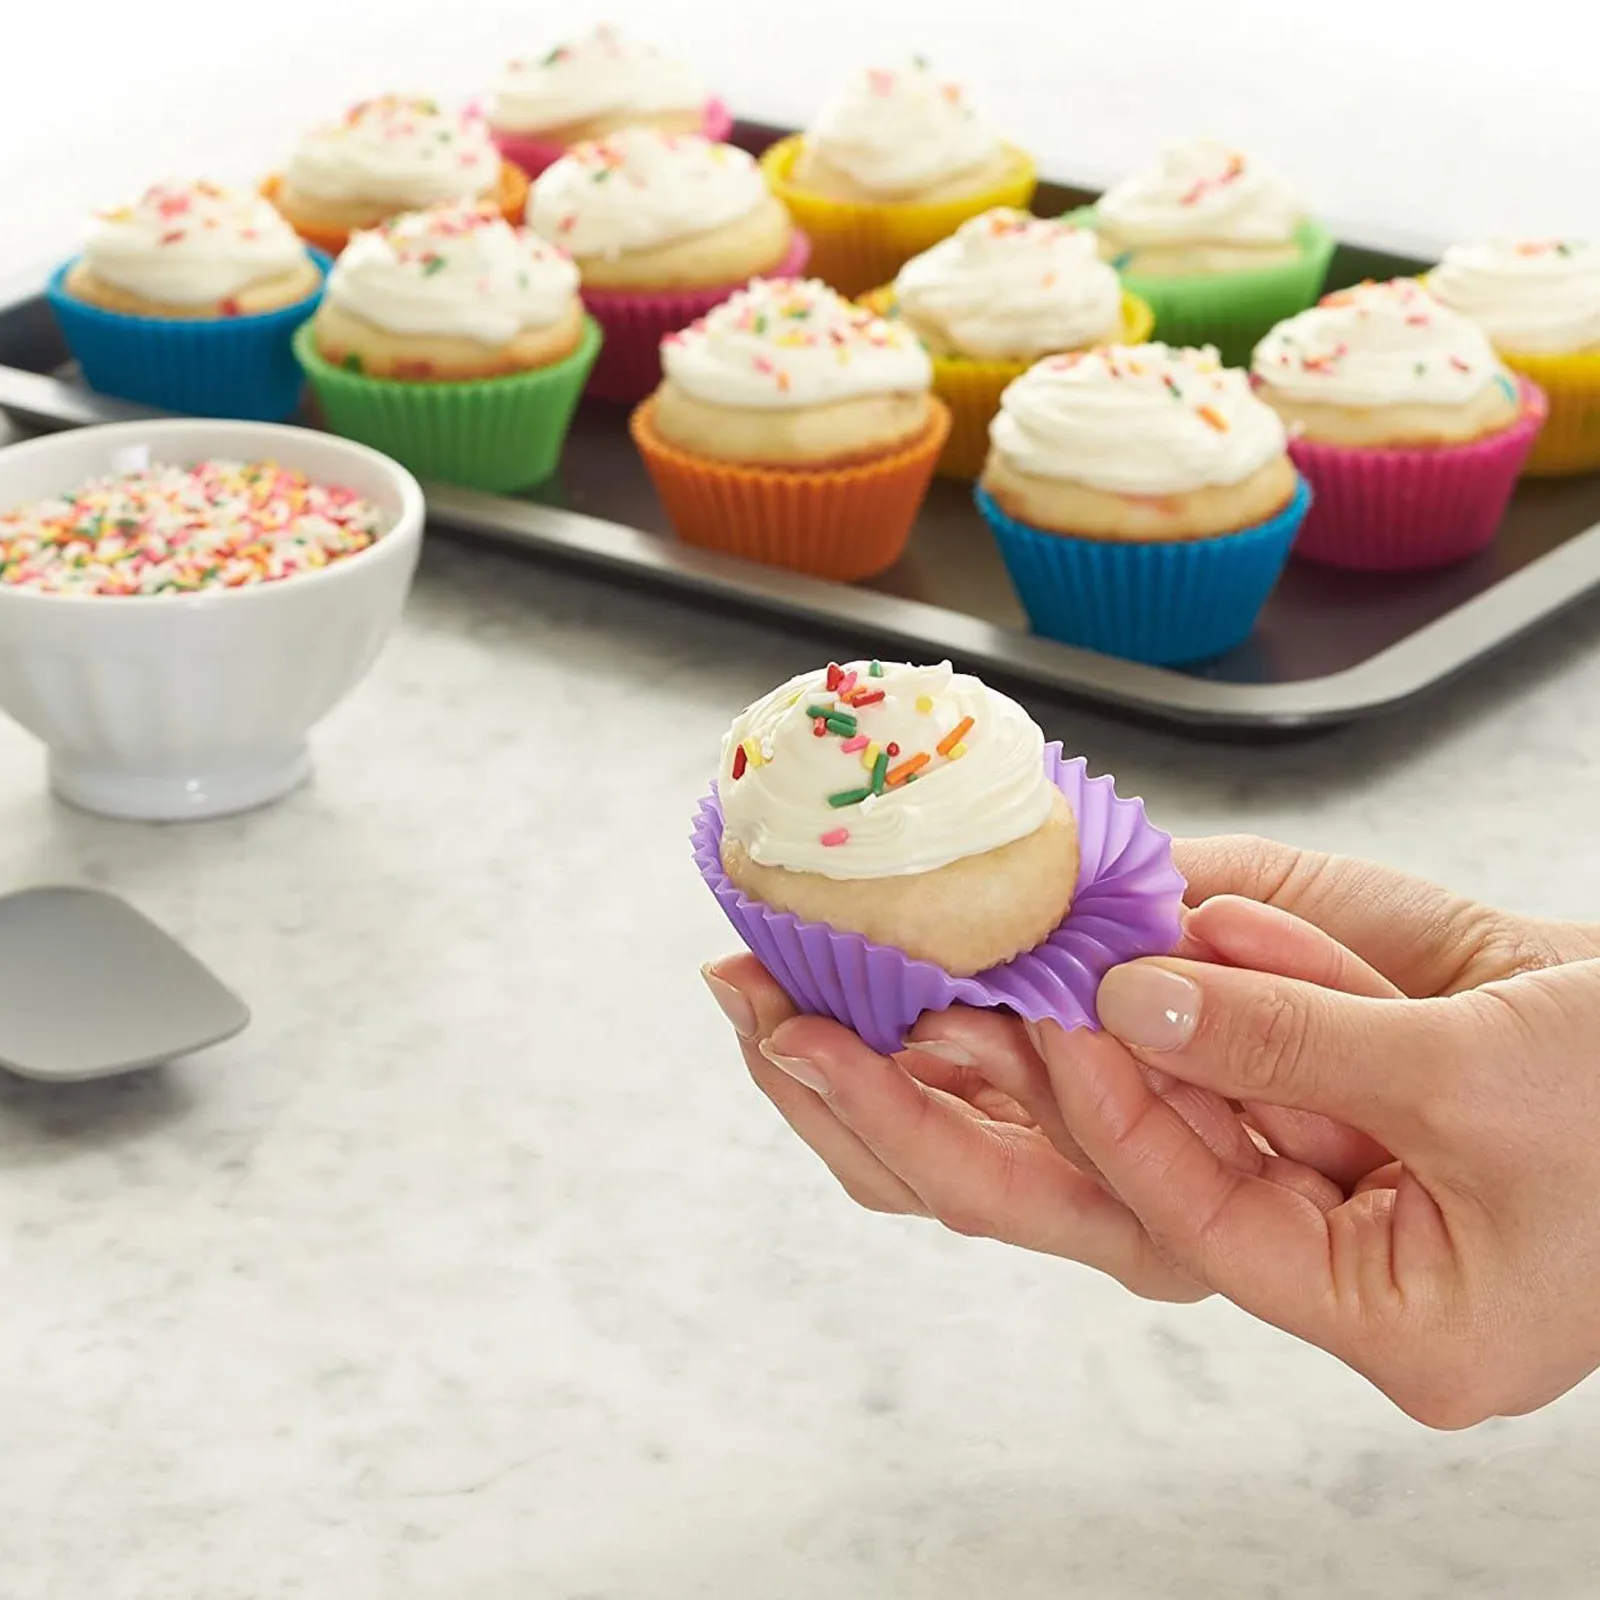 Silicone Baking Cups Set of 16 Standard Size 8 Rainbow Colors Non-stick  Silicone Cupcake Baking Cups, Reusable Cupcake Liners Muffins Cup Molds